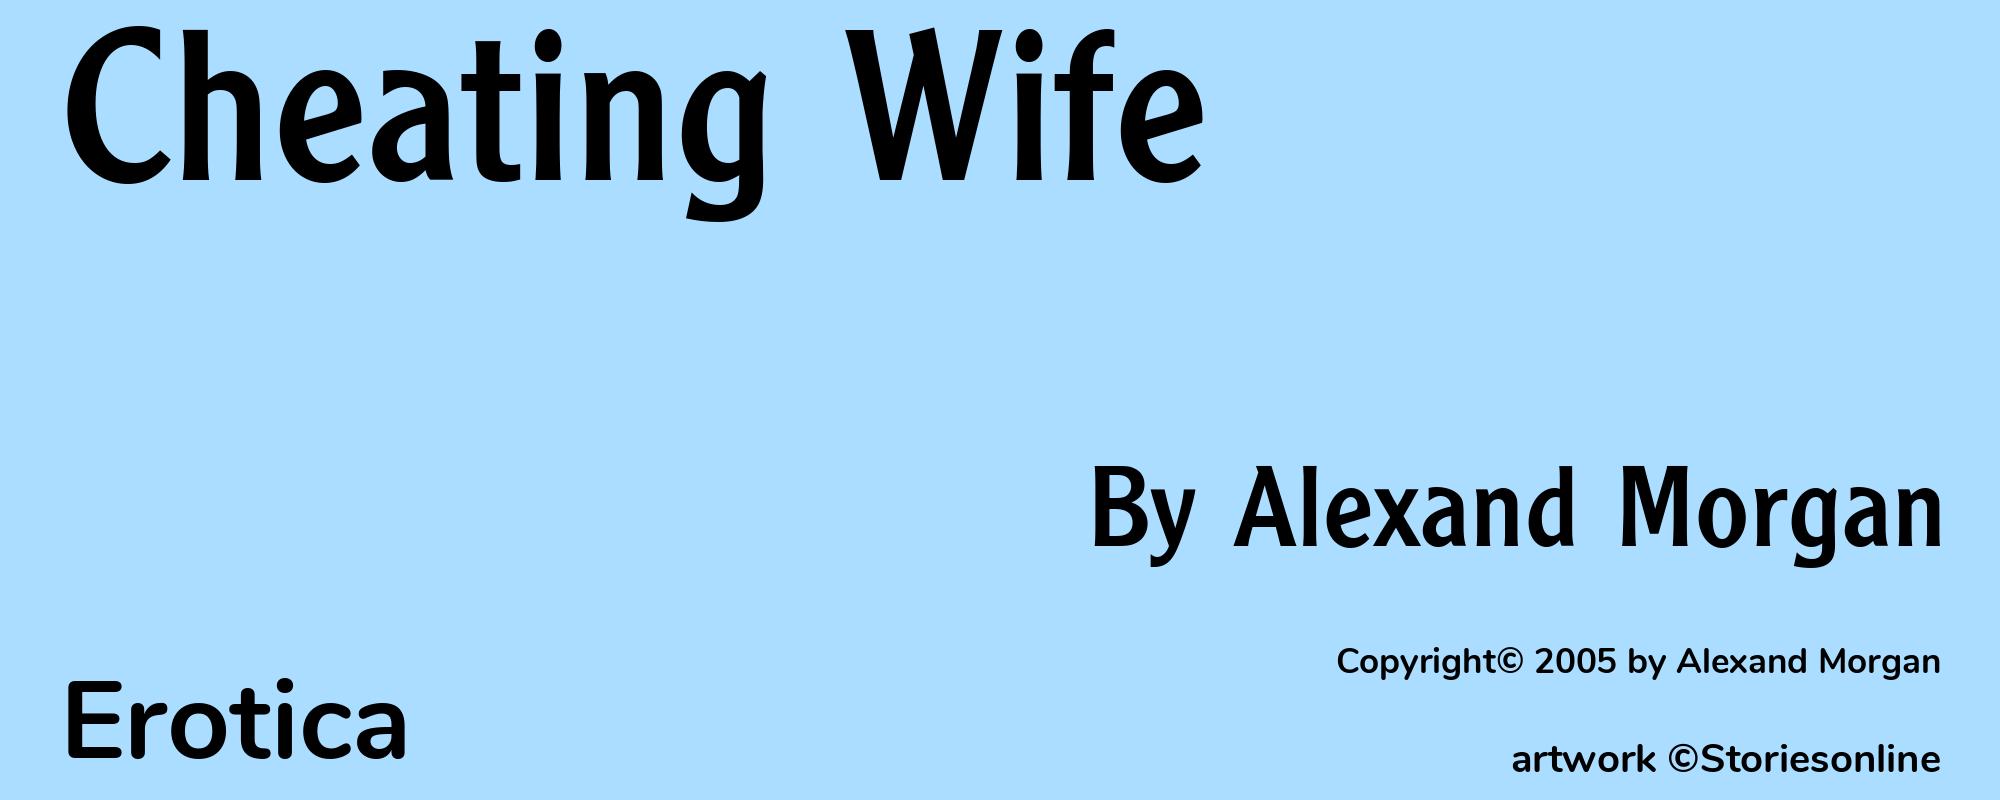 Cheating Wife - Cover